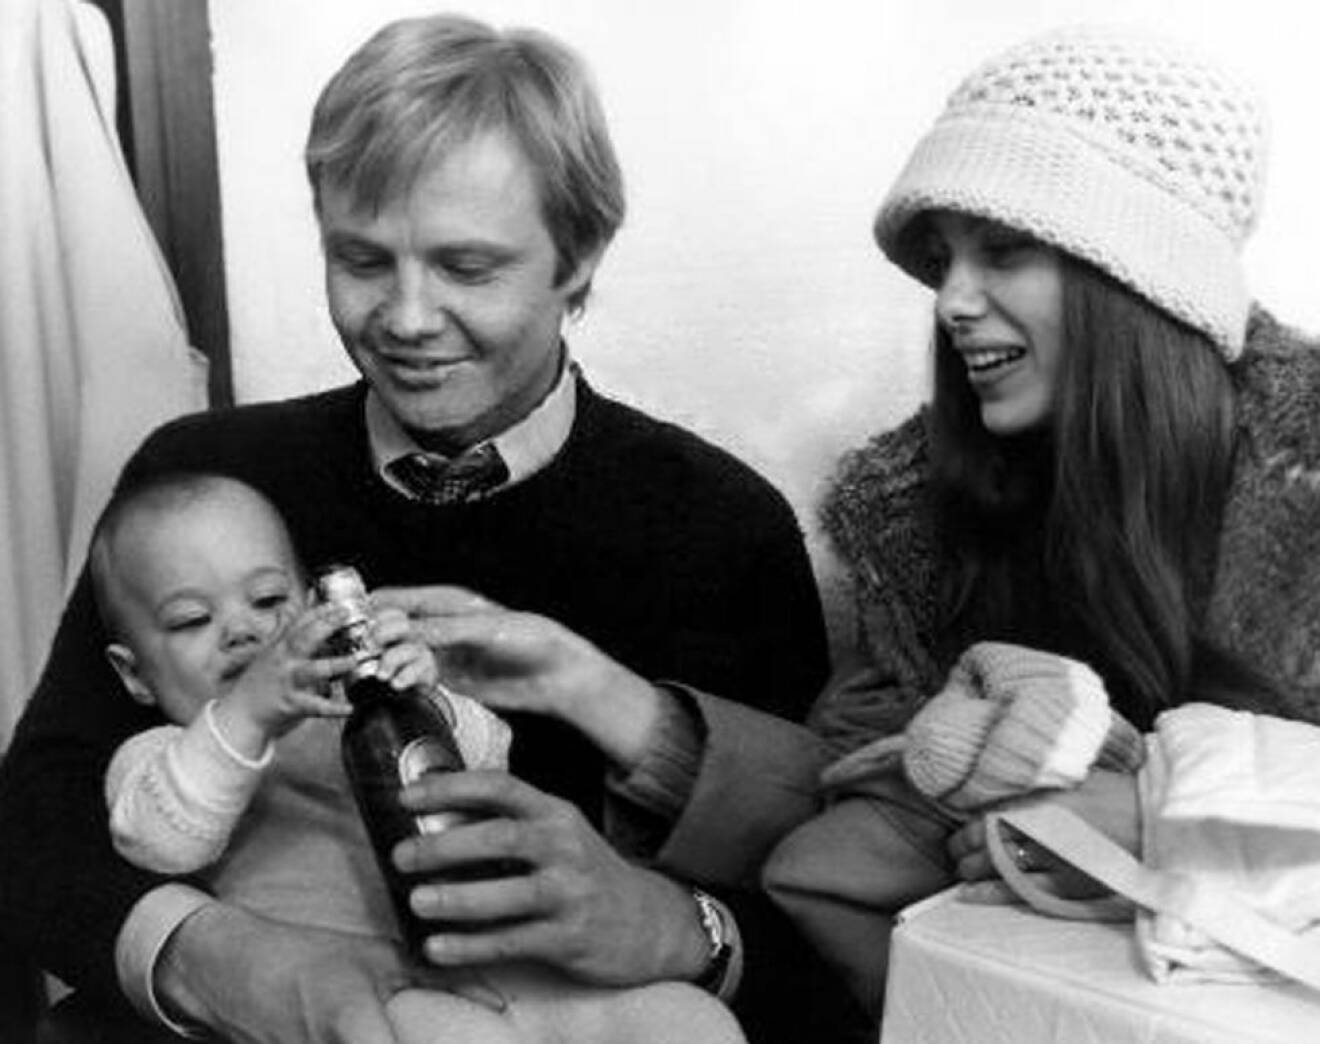 Family Picture: Angelina Jolie as a baby with her parents Jon Voight and Marcheline Bertrand in 1975. 74018 EDITORIAL USE ONLY Foto: Scope Features / IBL